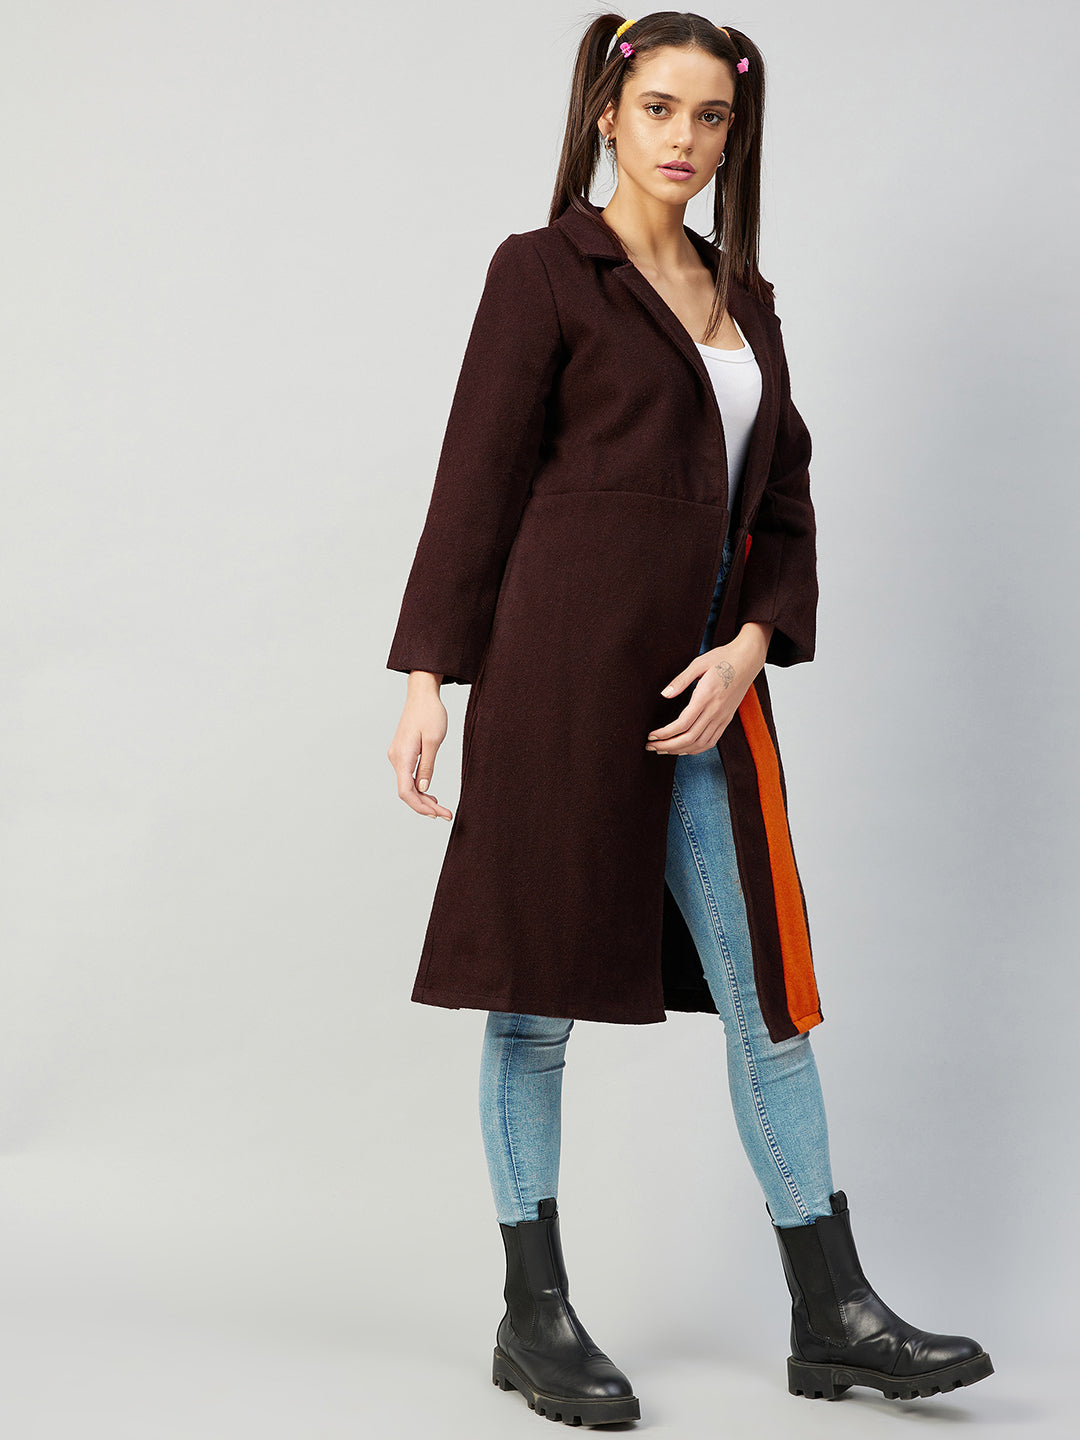 Athena Women Brown Solid Single-Breasted Longline Casual Pea Coat - Athena Lifestyle